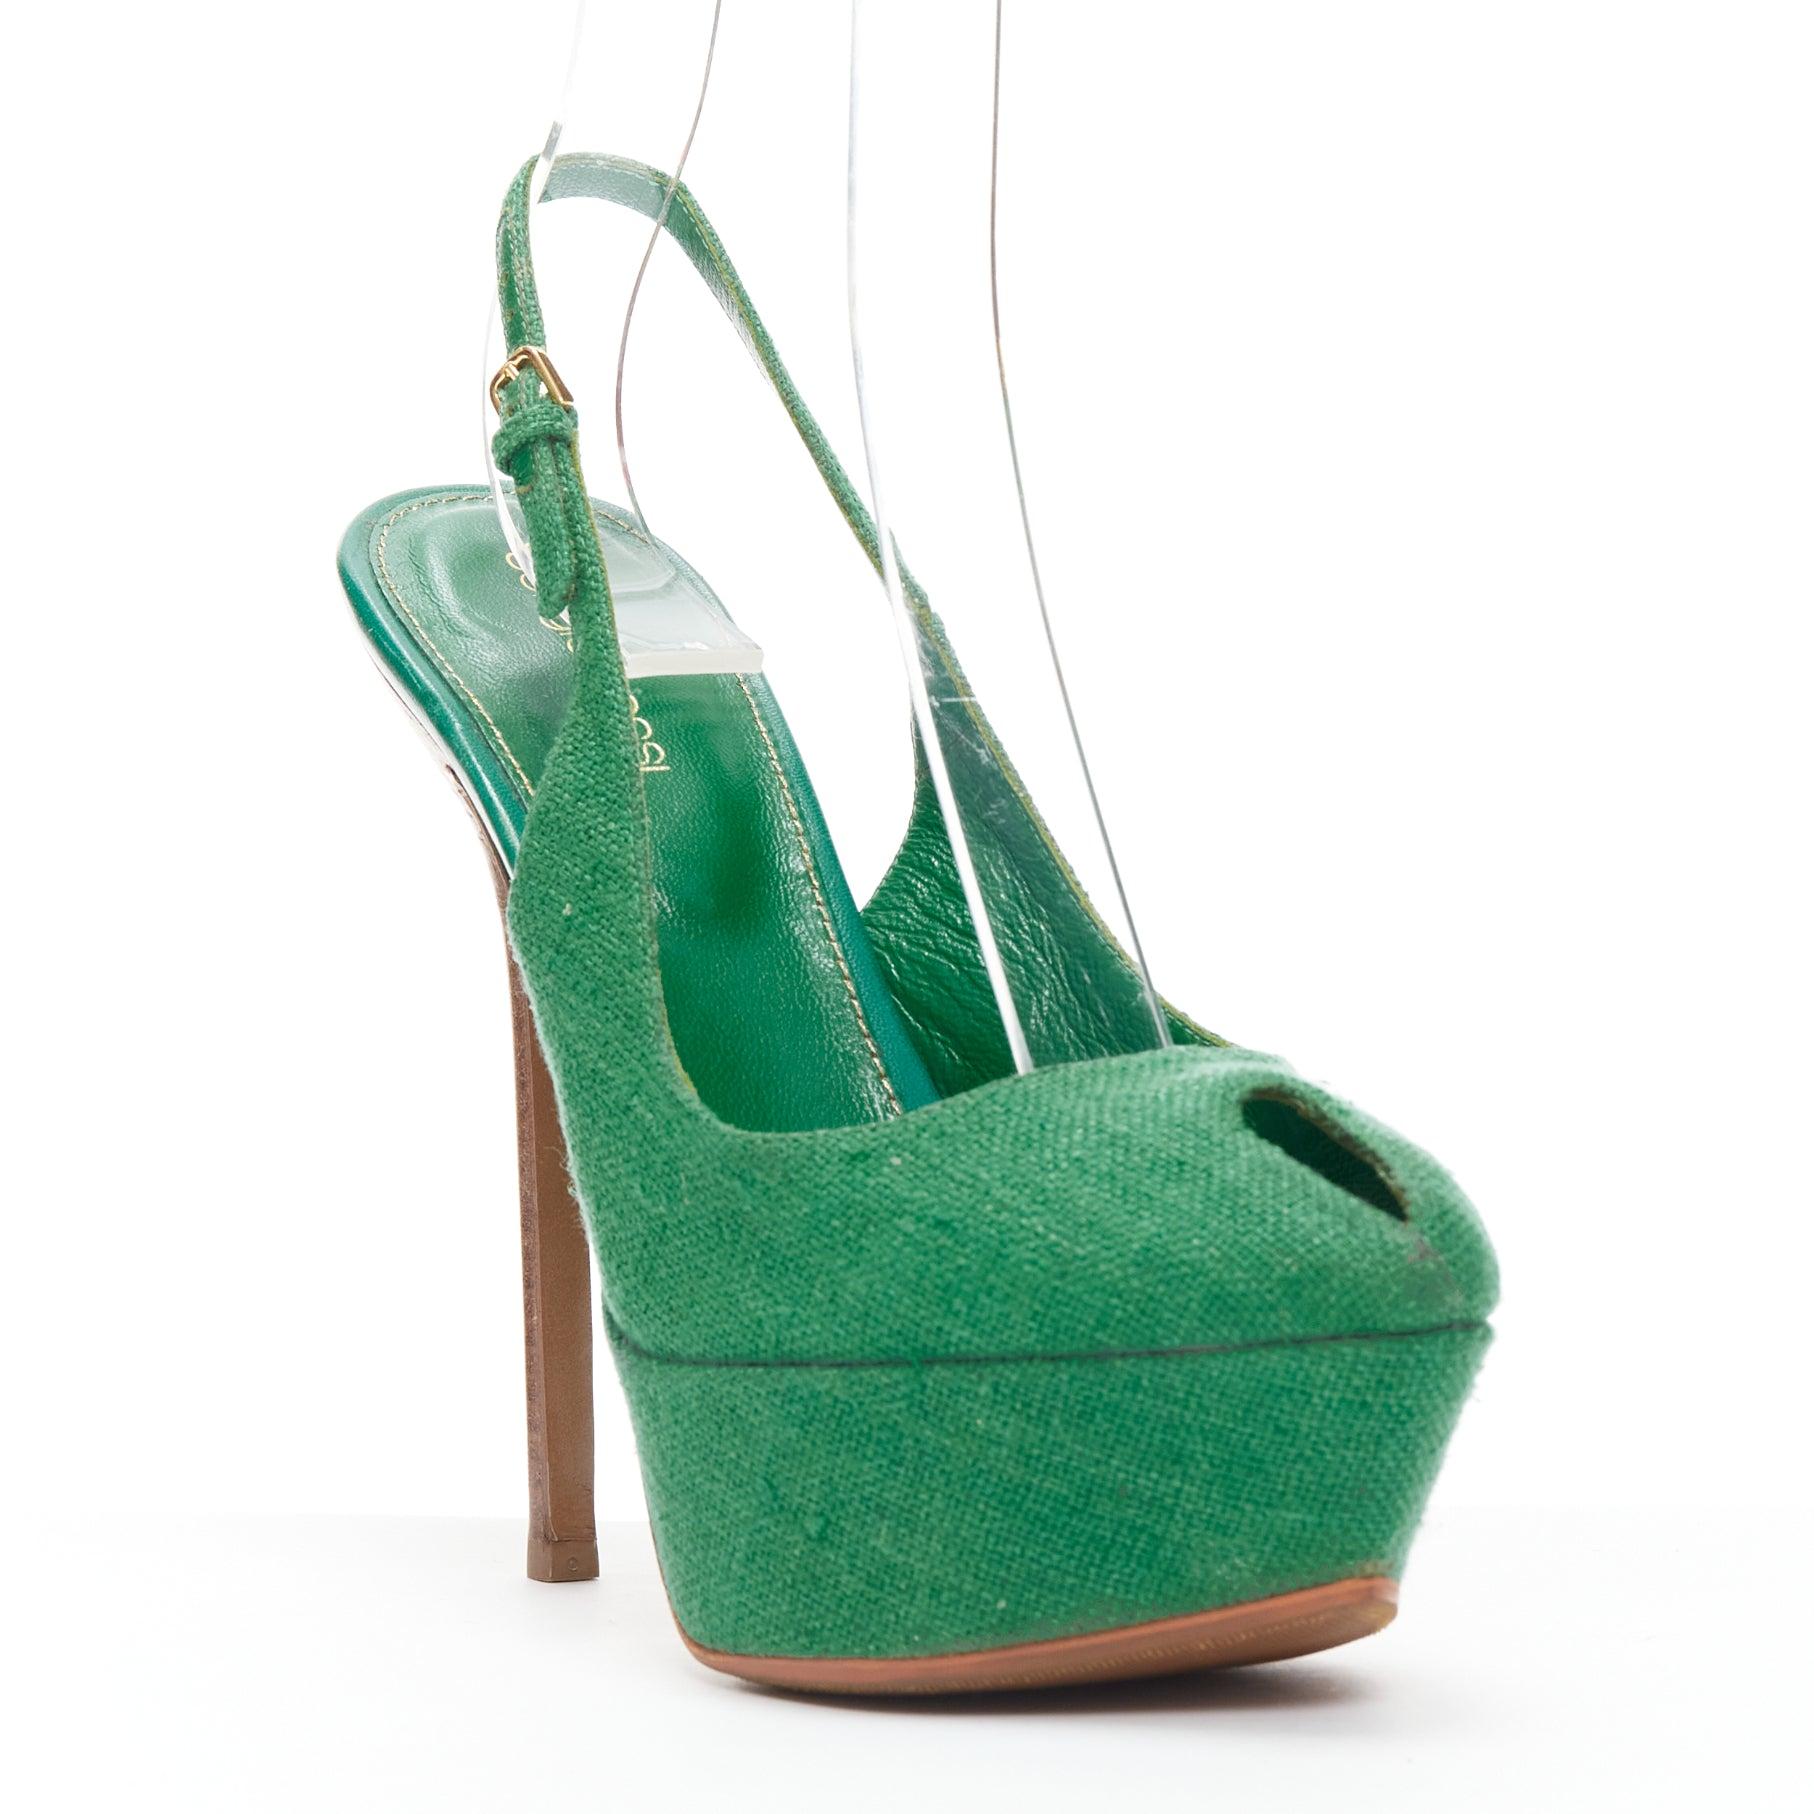 SERGIO ROSSI green canvas cachet peep toe platform slingback heel EU37
Reference: NKLL/A00124
Brand: Sergio Rossi
Material: Canvas, Wood
Color: Green, Brown
Pattern: Solid
Closure: Slingback
Lining: Green Leather
Extra Details: Gold-tone